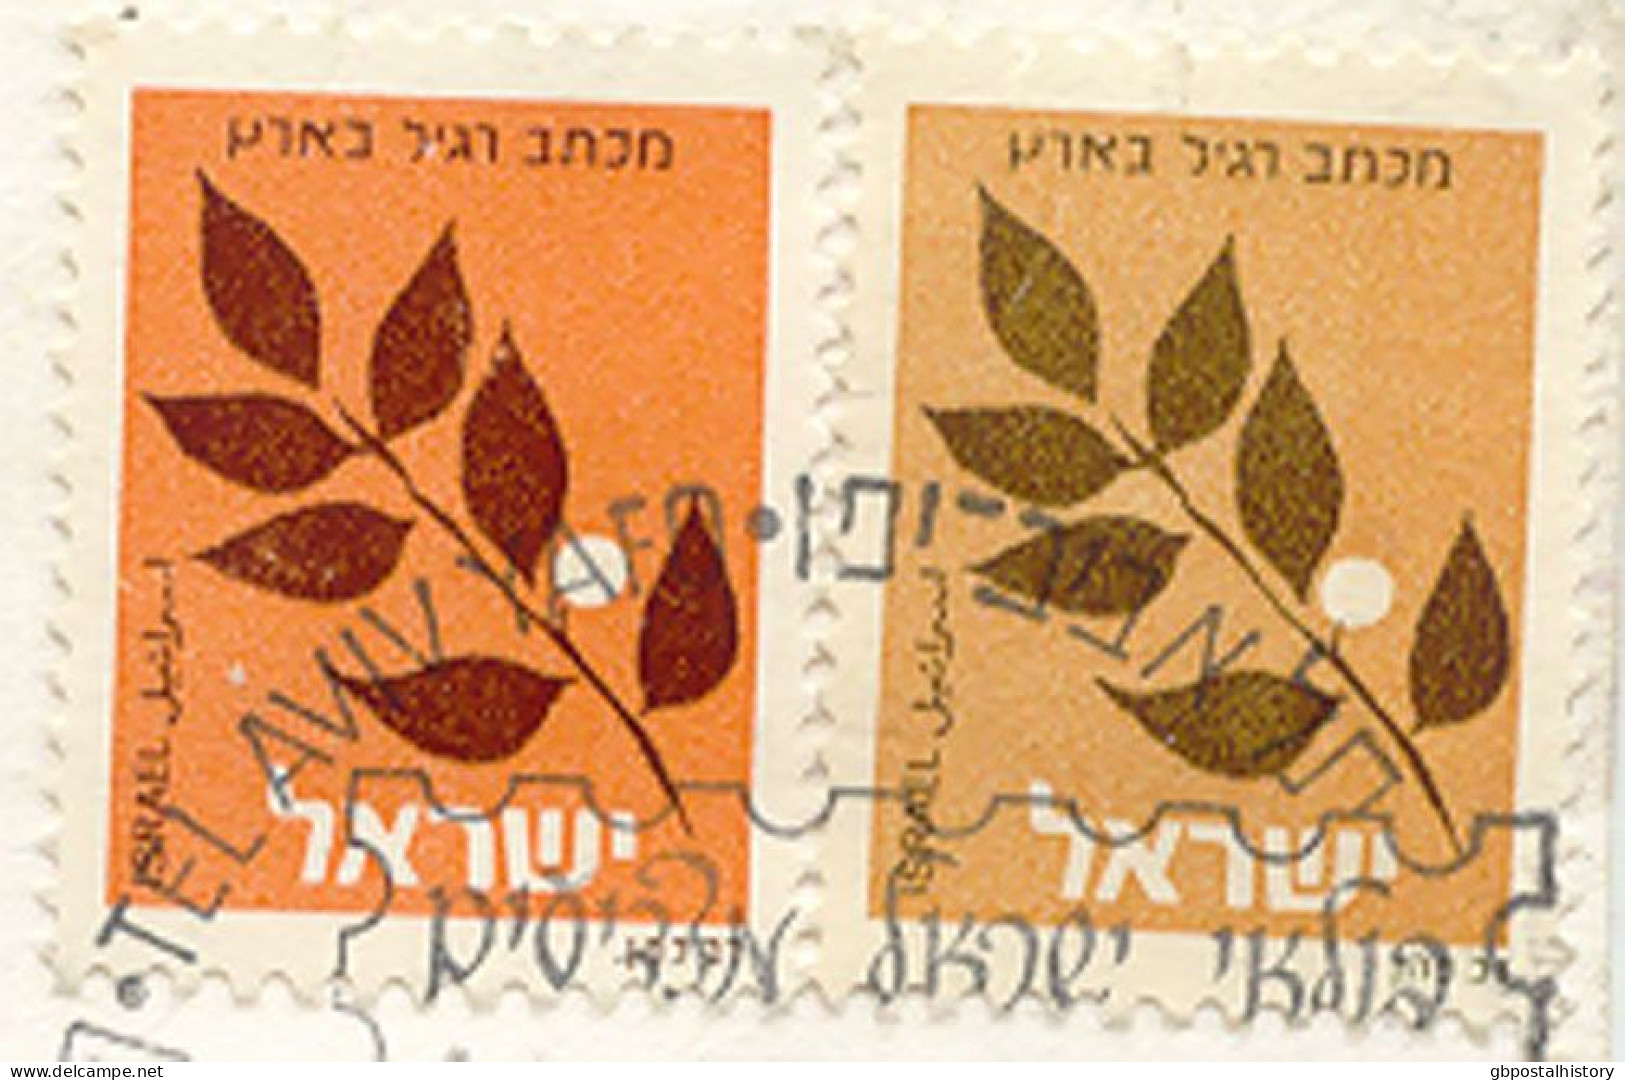 ISRAEL 1986 Branch Without Valuation 2 Times On Very Fine Cover With SST "AMERIPEX '86 22.5.1986", MAJOR ERROR & VARIETY - Cartas & Documentos